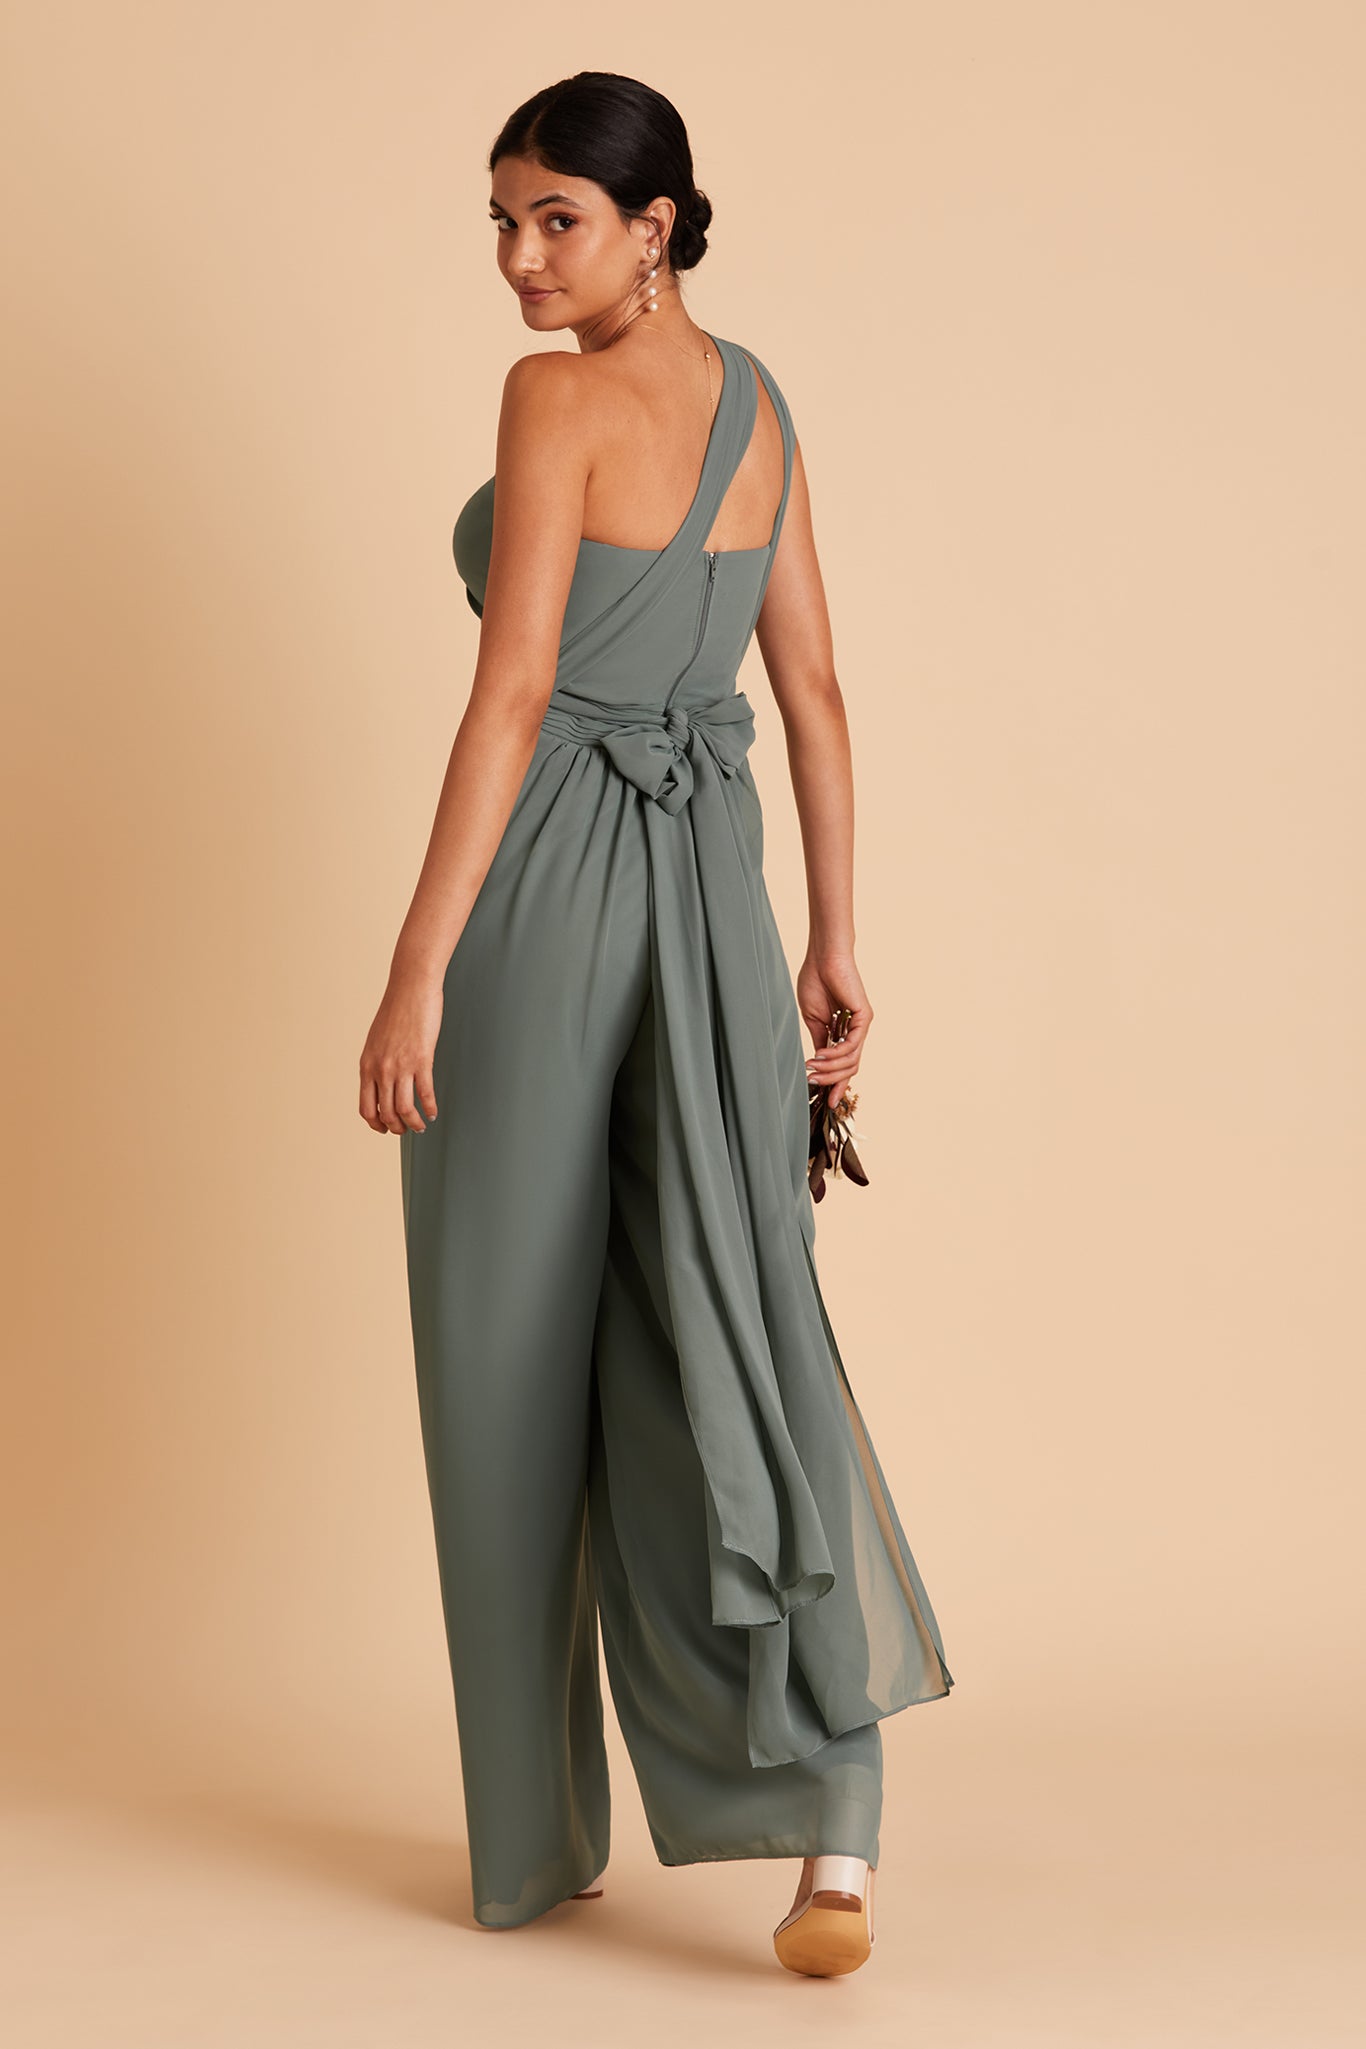 Gigi convertible jumpsuit in sea glass chiffon by Birdy Grey, back view